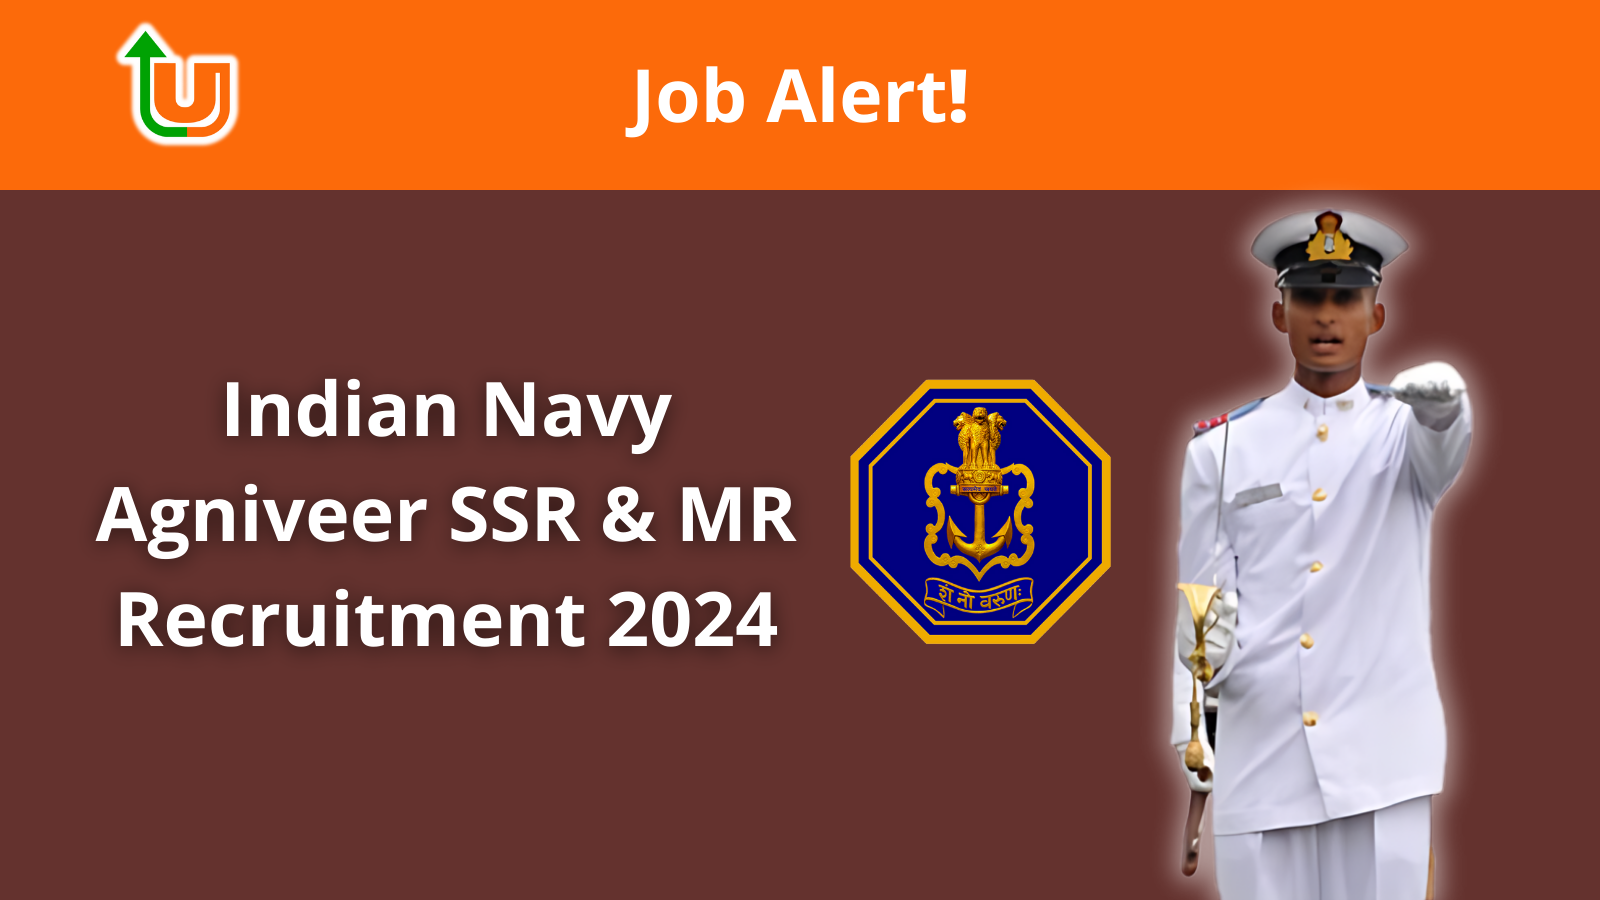 Indian Navy Agniveer SSR & MR Recruitment 2024: Know in Detail